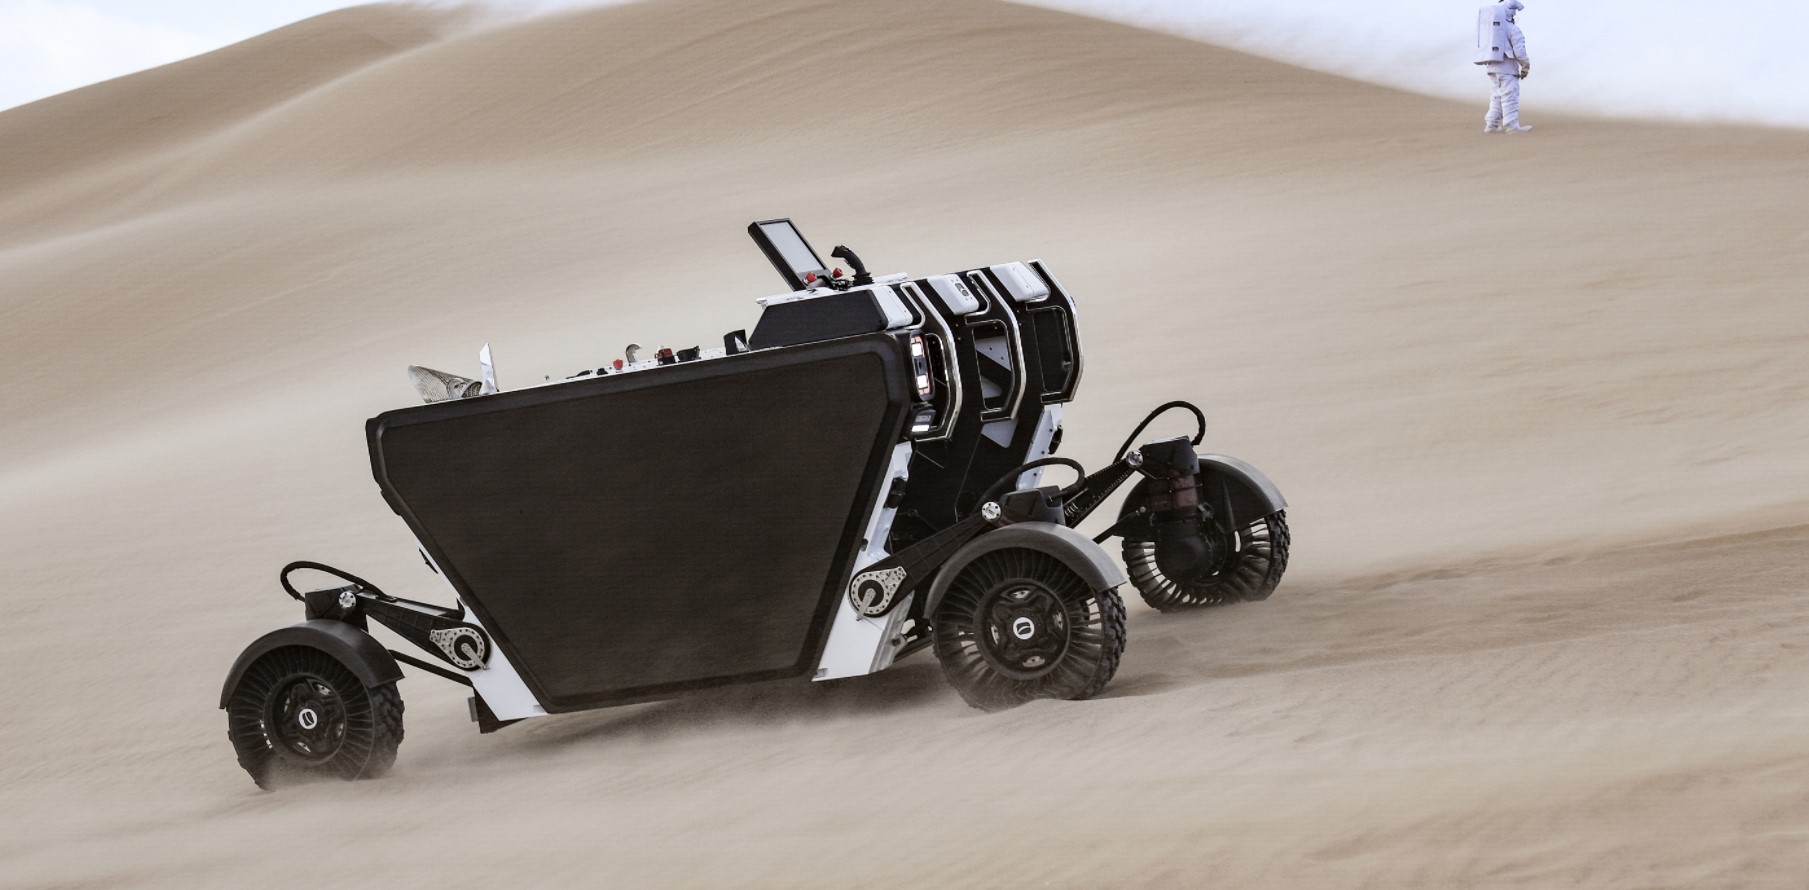 Chris Hadfield Drives in the Desert With a new Lunar Rover Prototype